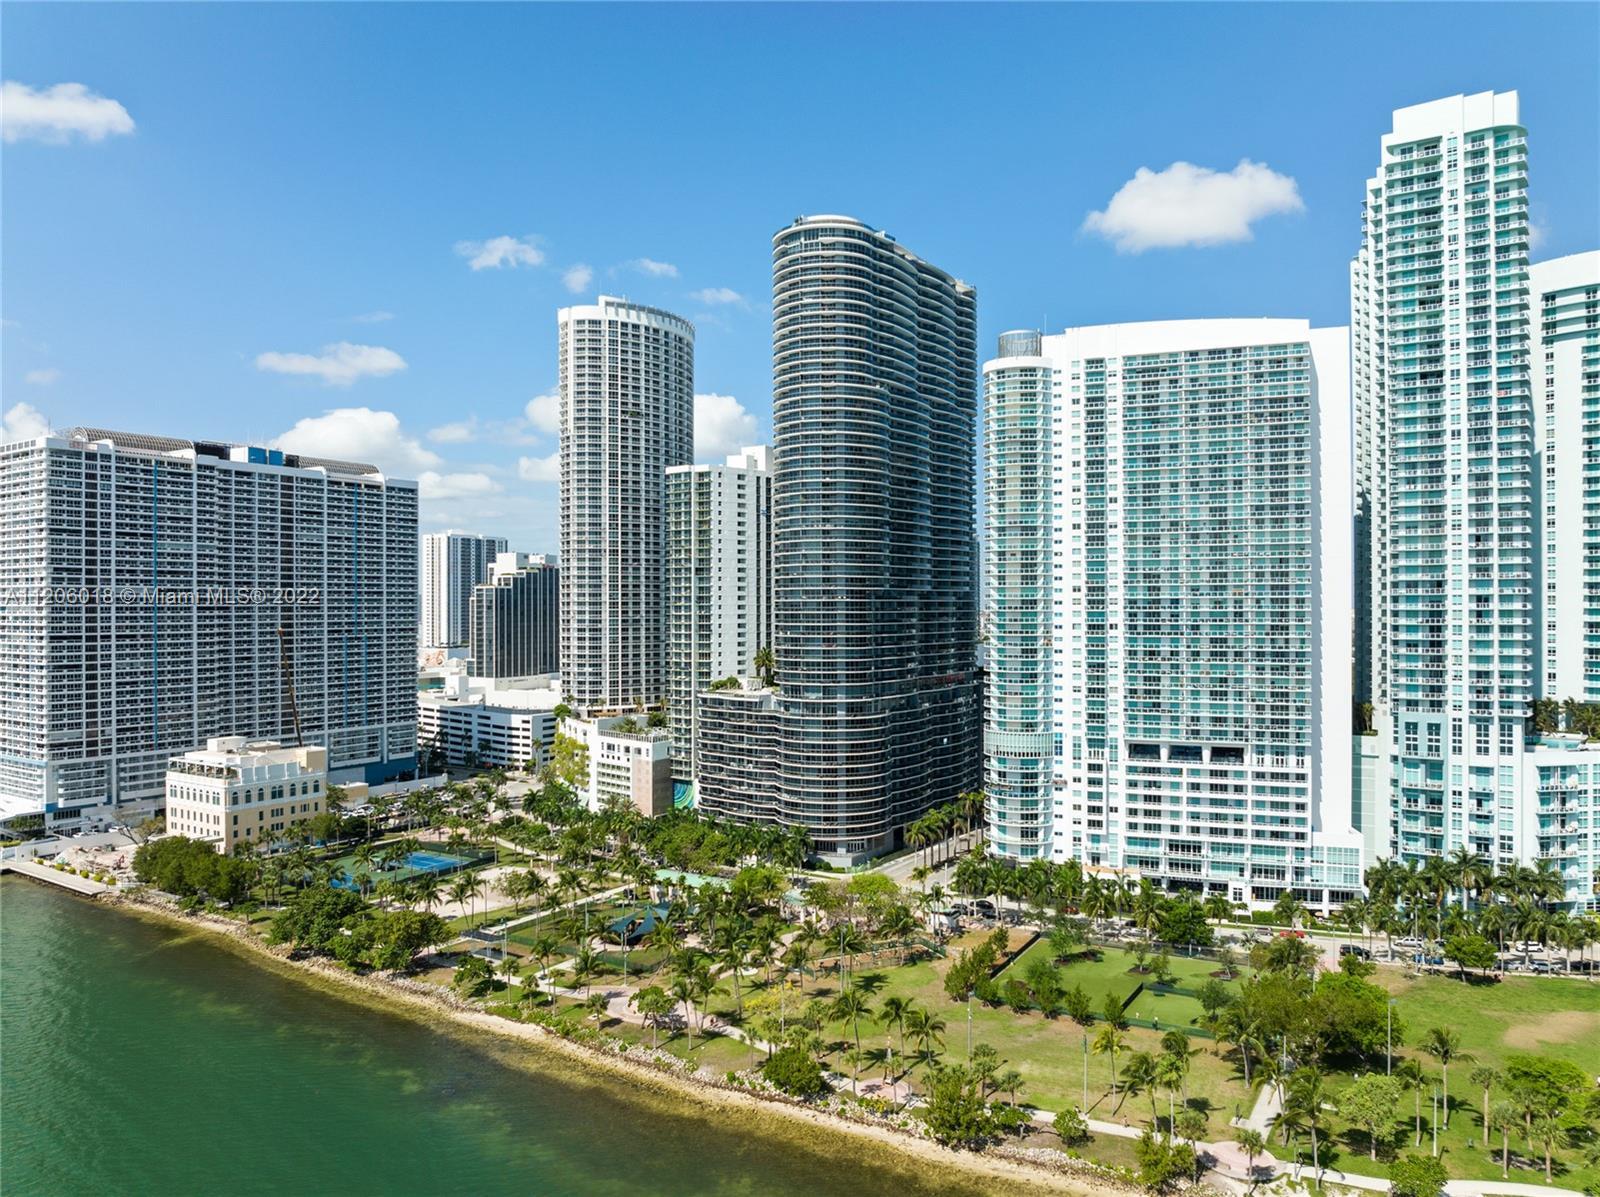 Live the Miami luxury at it's highest! This 2-bed/3-bath + den unit offers bay and city views from t